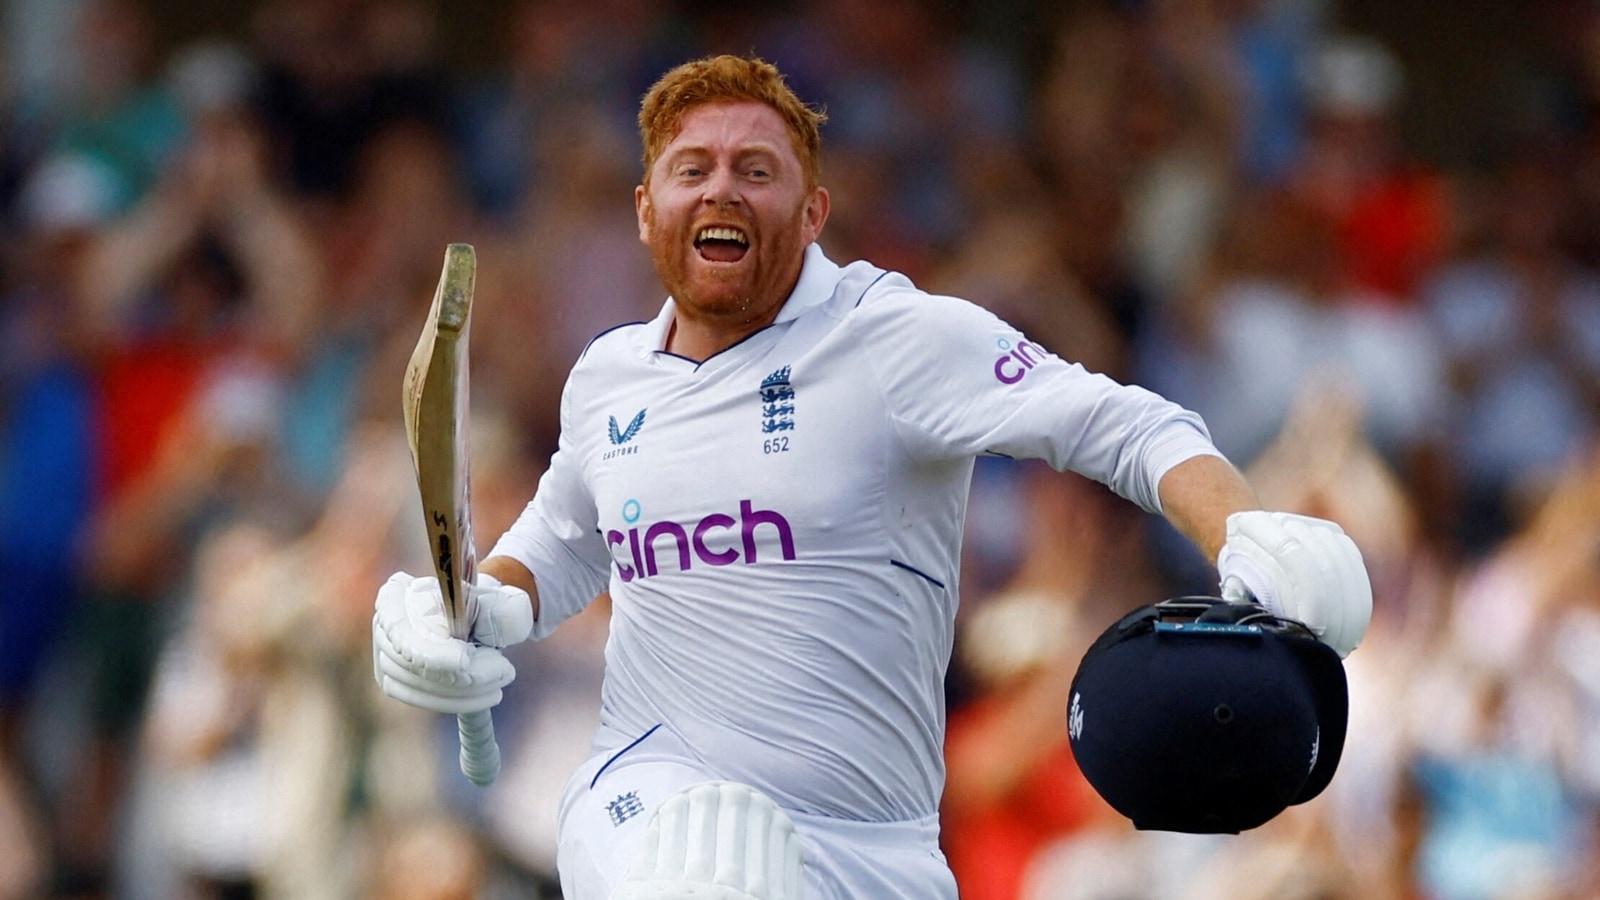 Just whack it in the stands': Bairstow after England's fastest ton in 120 years | Cricket - Hindustan Times